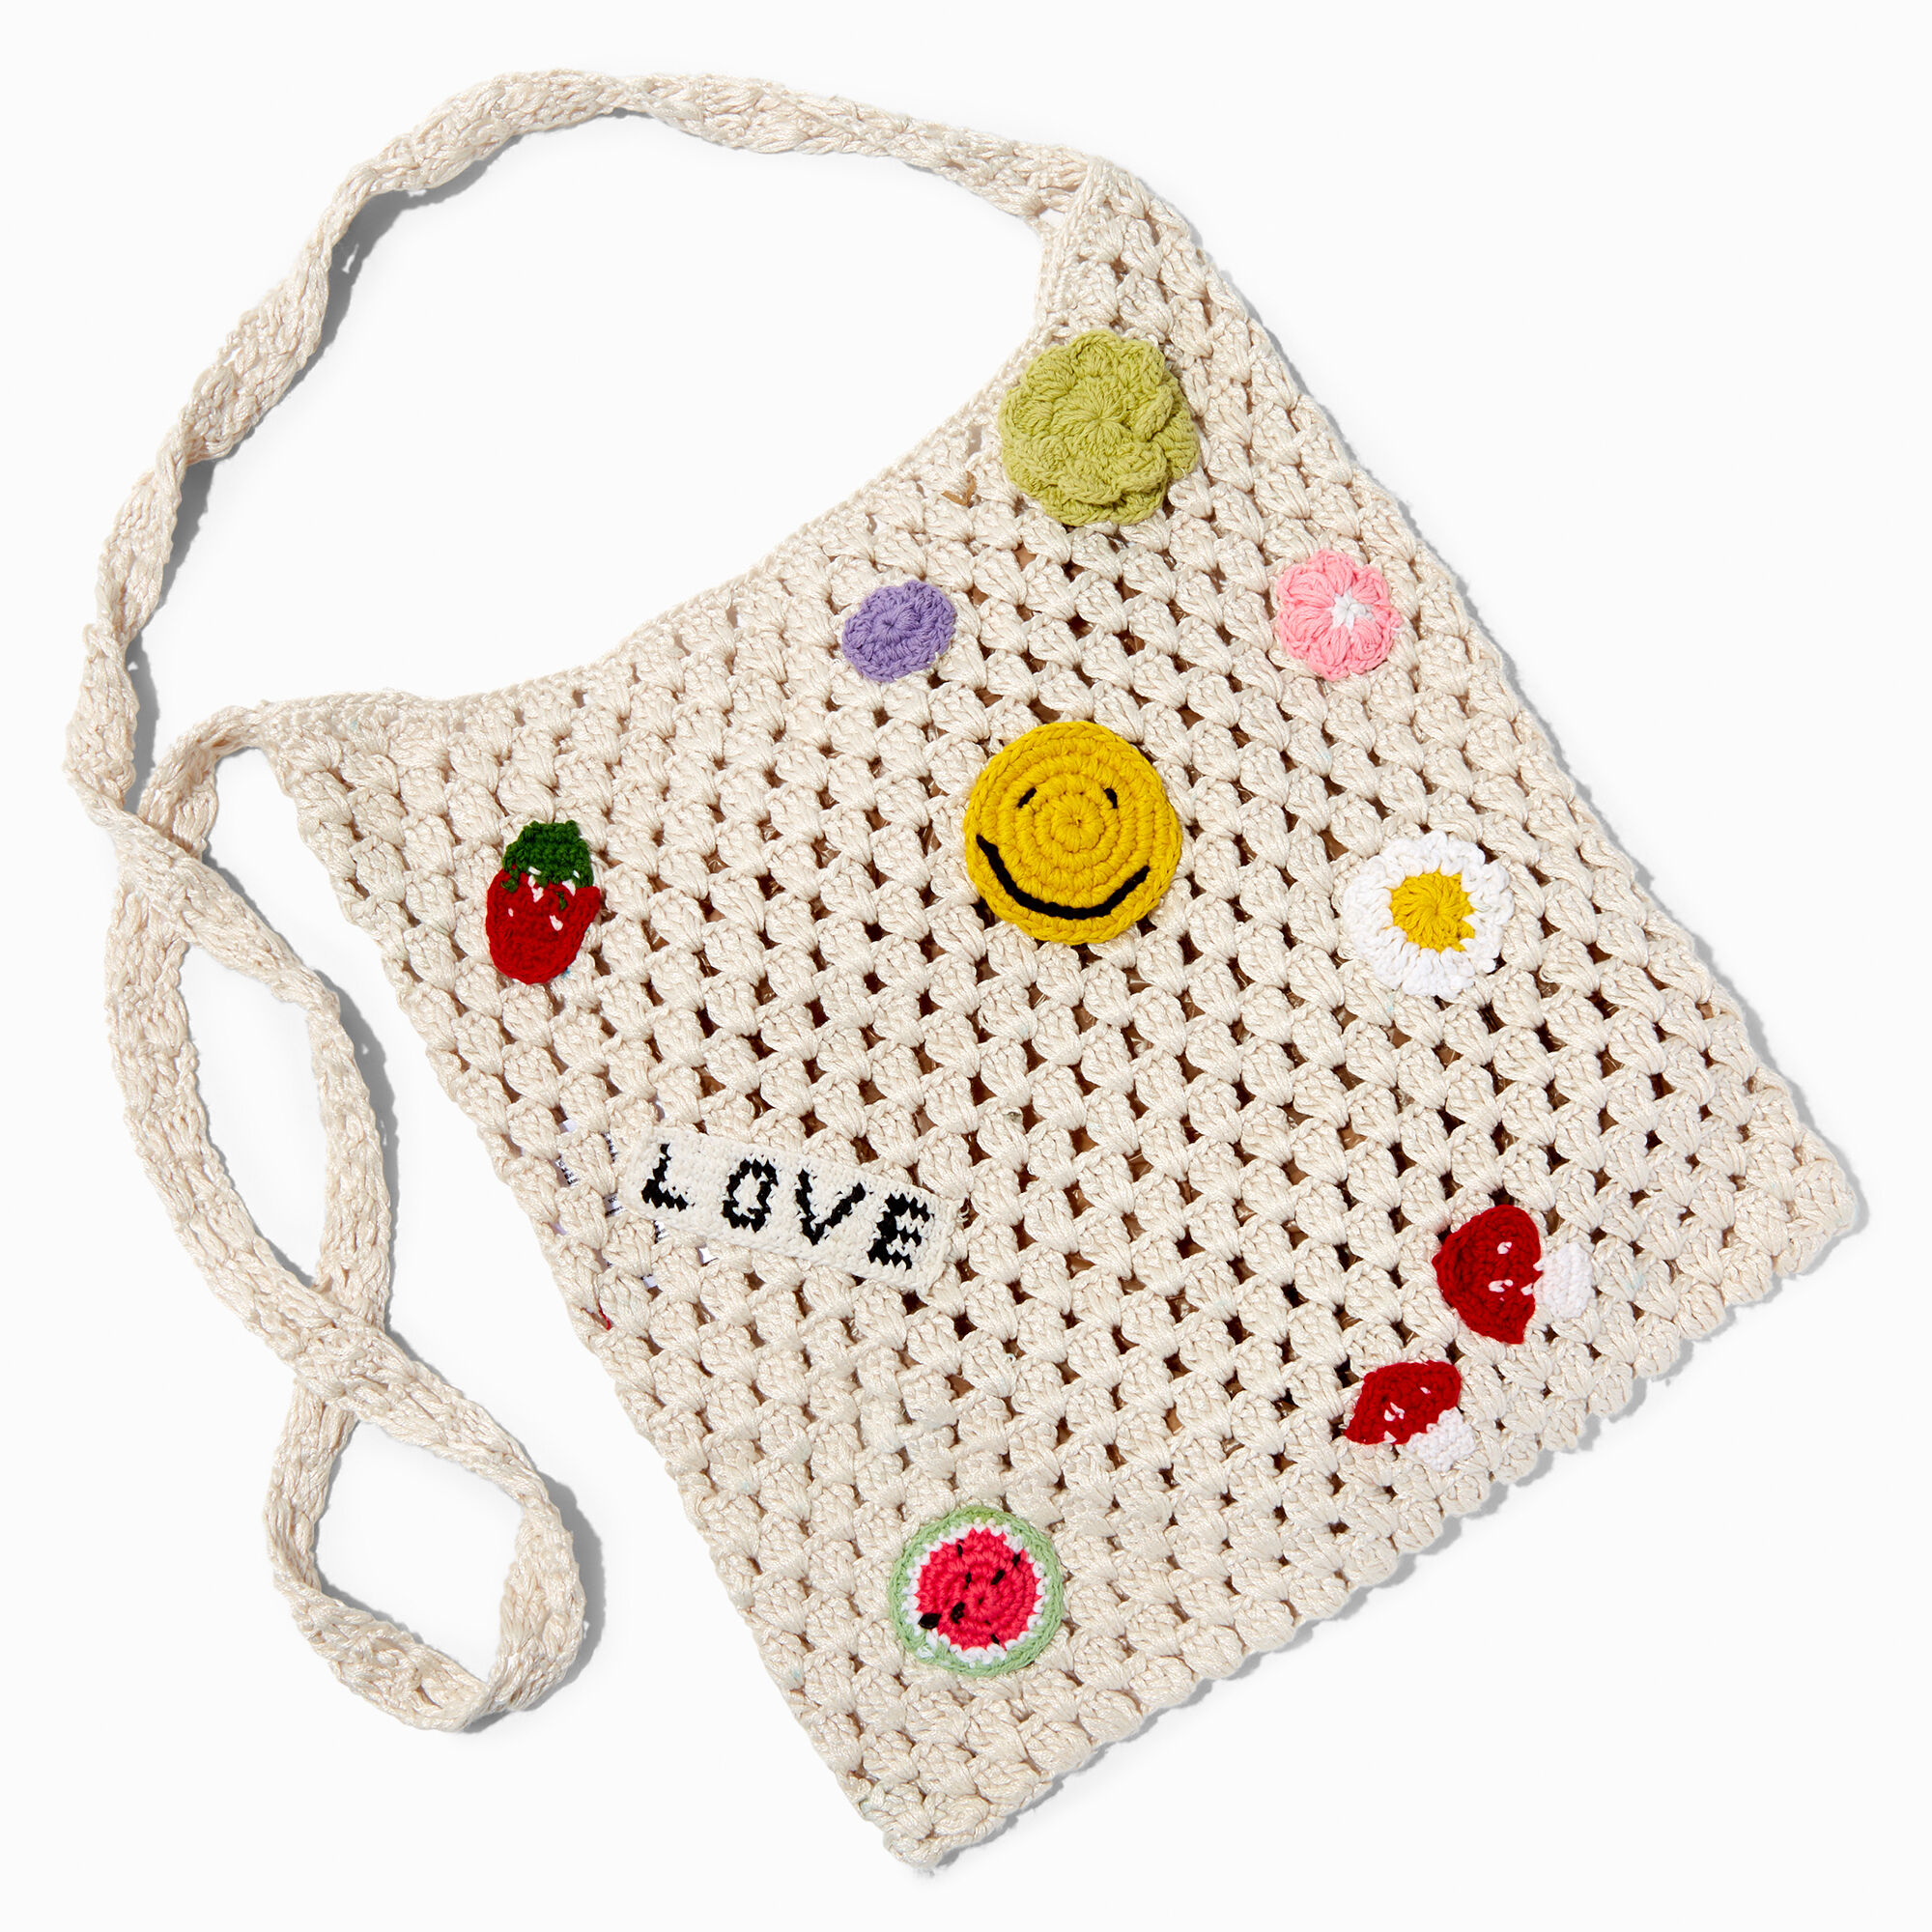 View Claires Happy Icons Crocheted Hobo Bag information